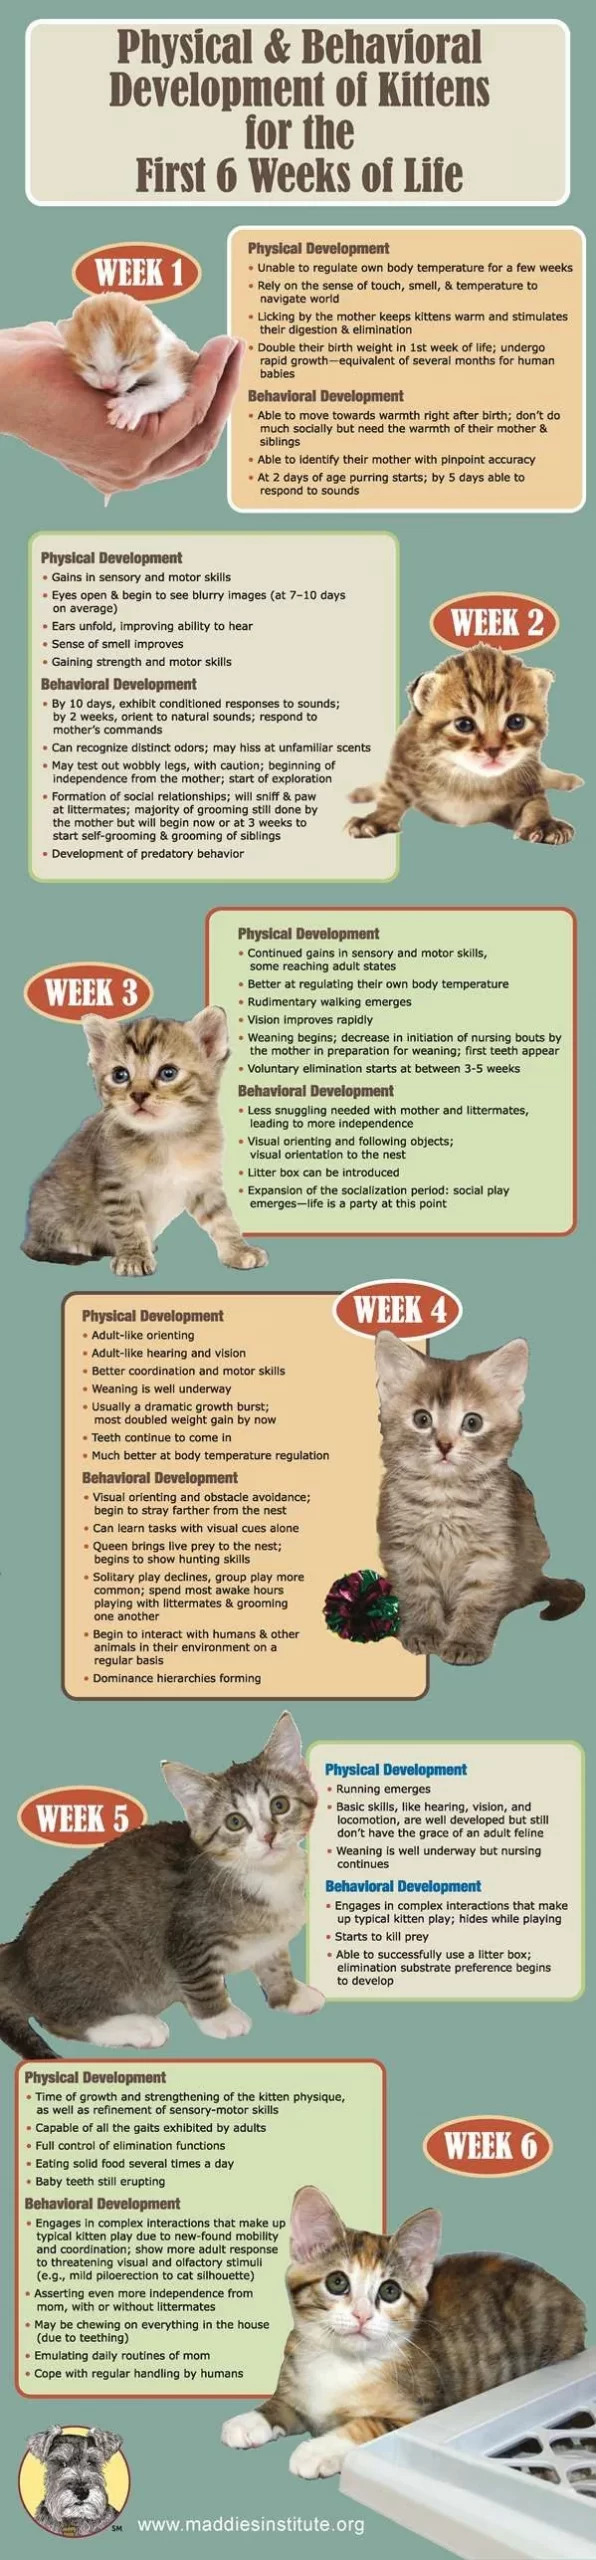 Kitten Development in the First Six Weeks of Life  